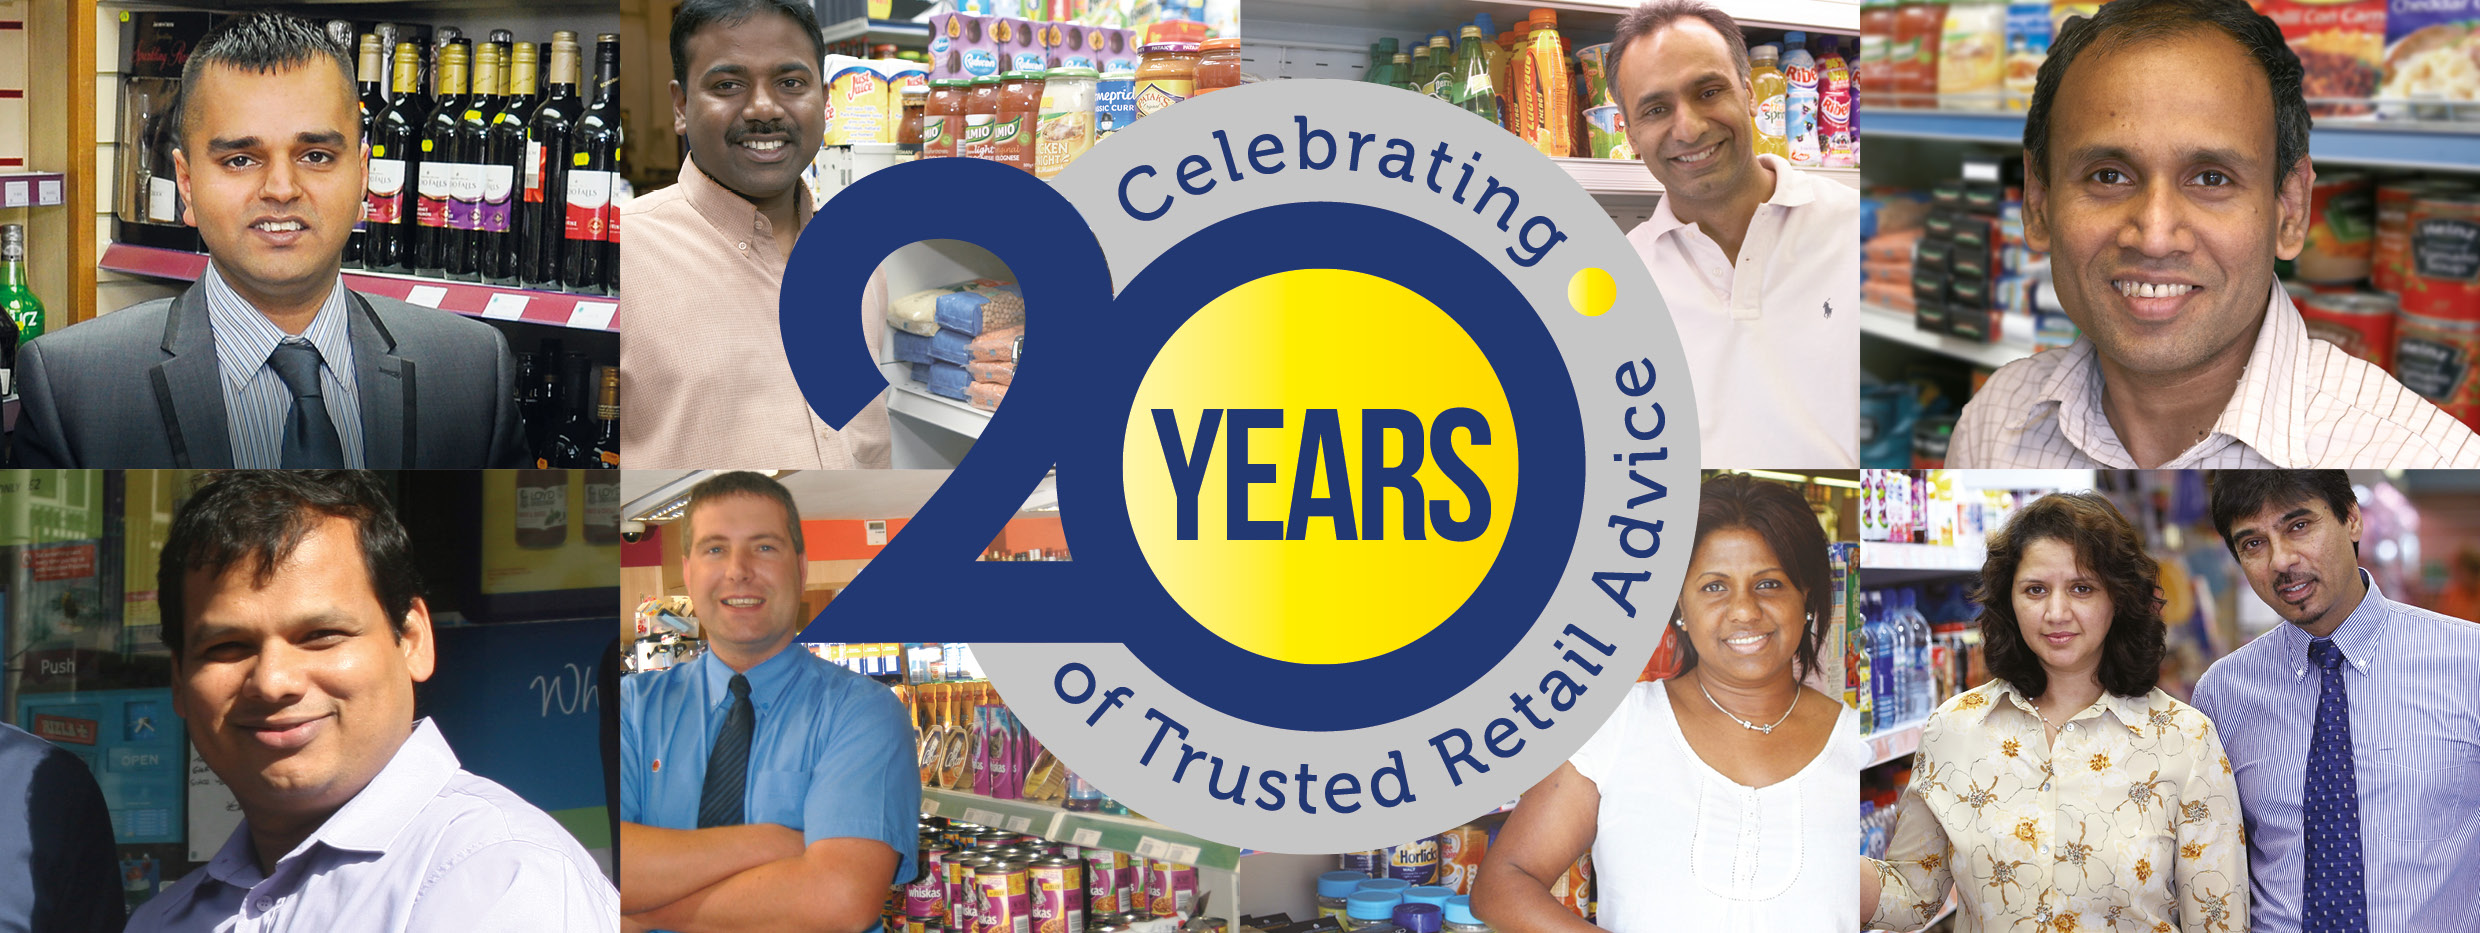 Partners for Growth, the industry initiative launched by Unilever in 2003, is celebrating its 20th anniversary by giving one retailer the chance to win £500 plus the priceless advice of their retail experts